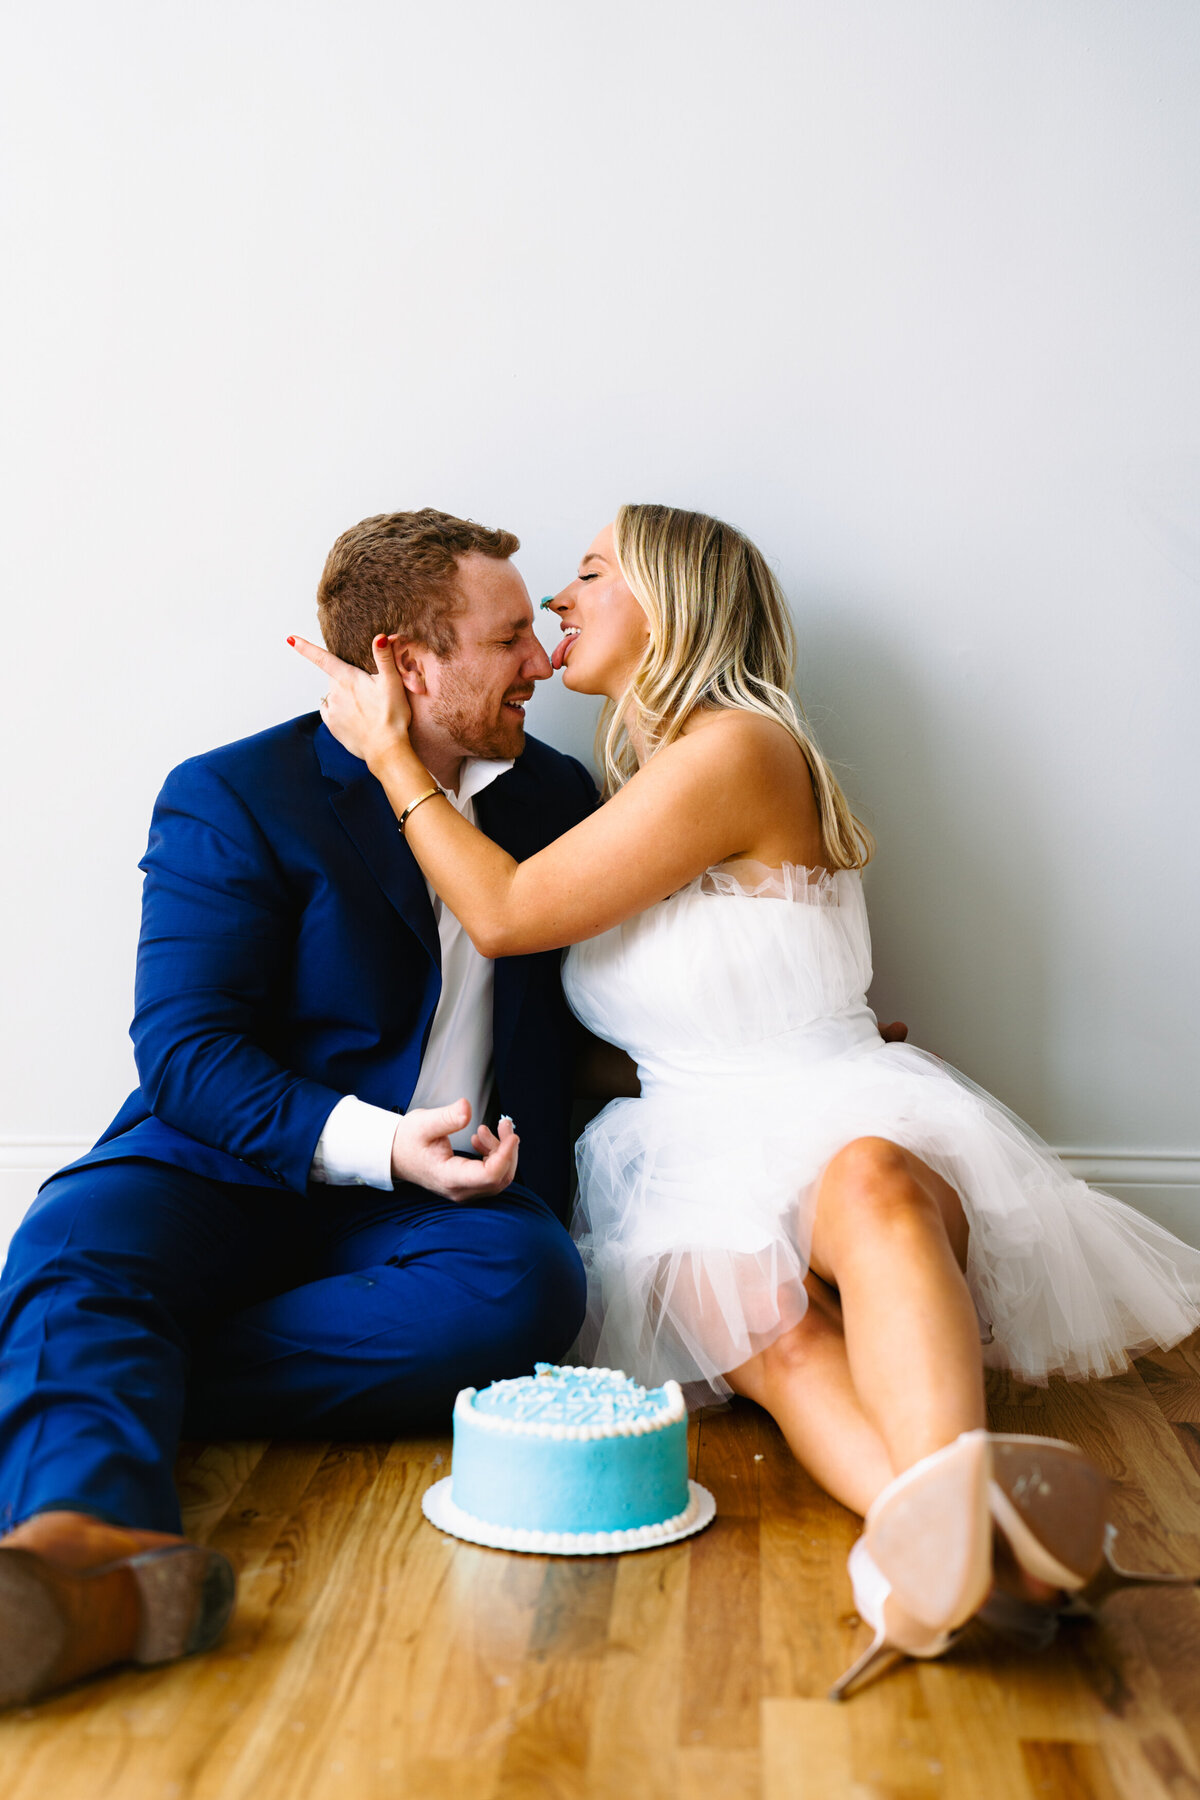 Aspen-Avenue-Chicago-Wedding-Photographer-Engagement-Session-Darling-Studio-Downtown-Unique-Editorial-Cake-Frenchie-Dog-Rent-The-Runway-Candid-Fun-Confetti-FAV-117